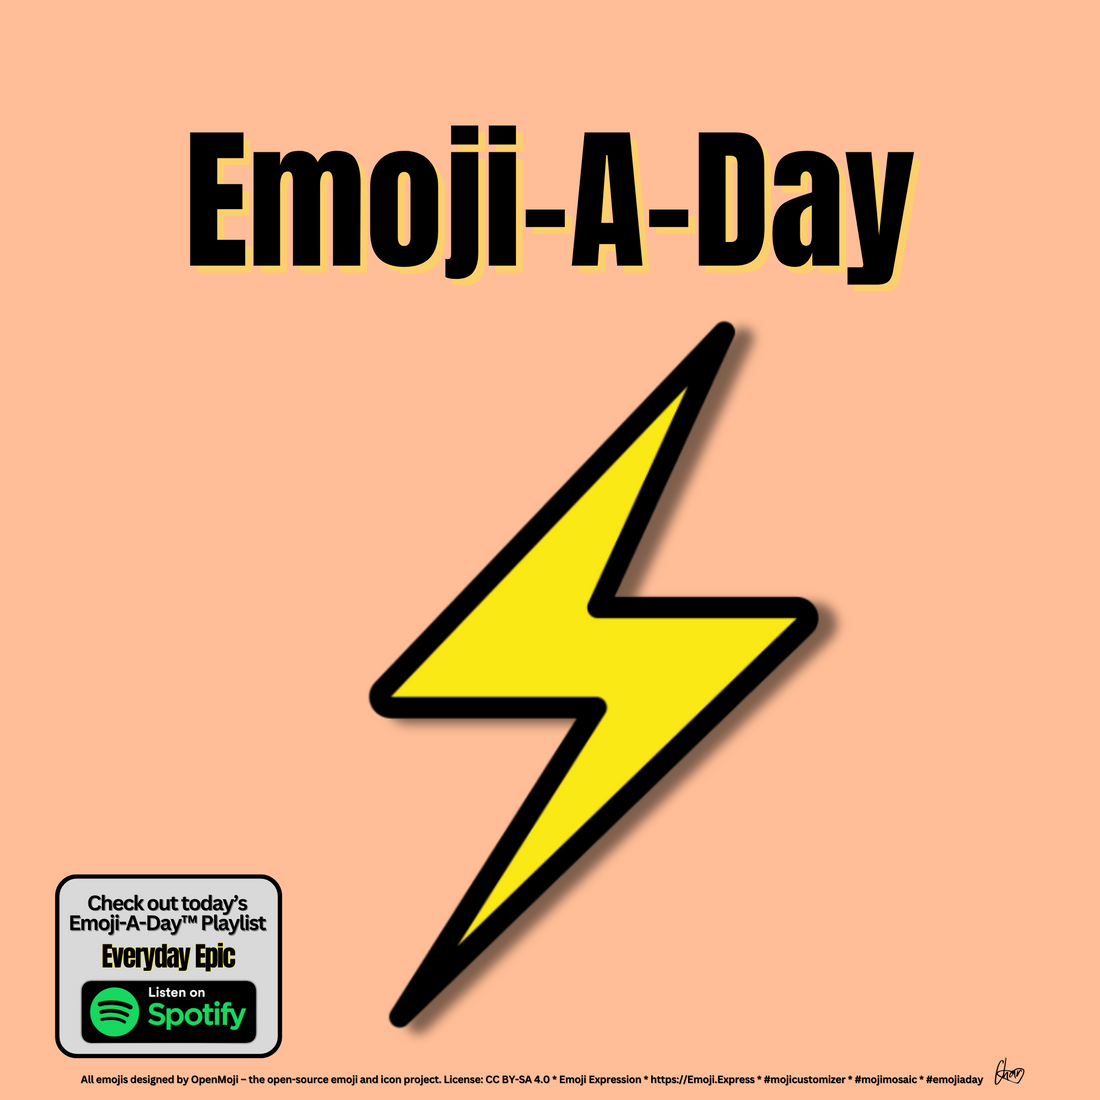 Emoij-A-Day theme with High Voltage emoji and Everyday Epic Spotify Playlist